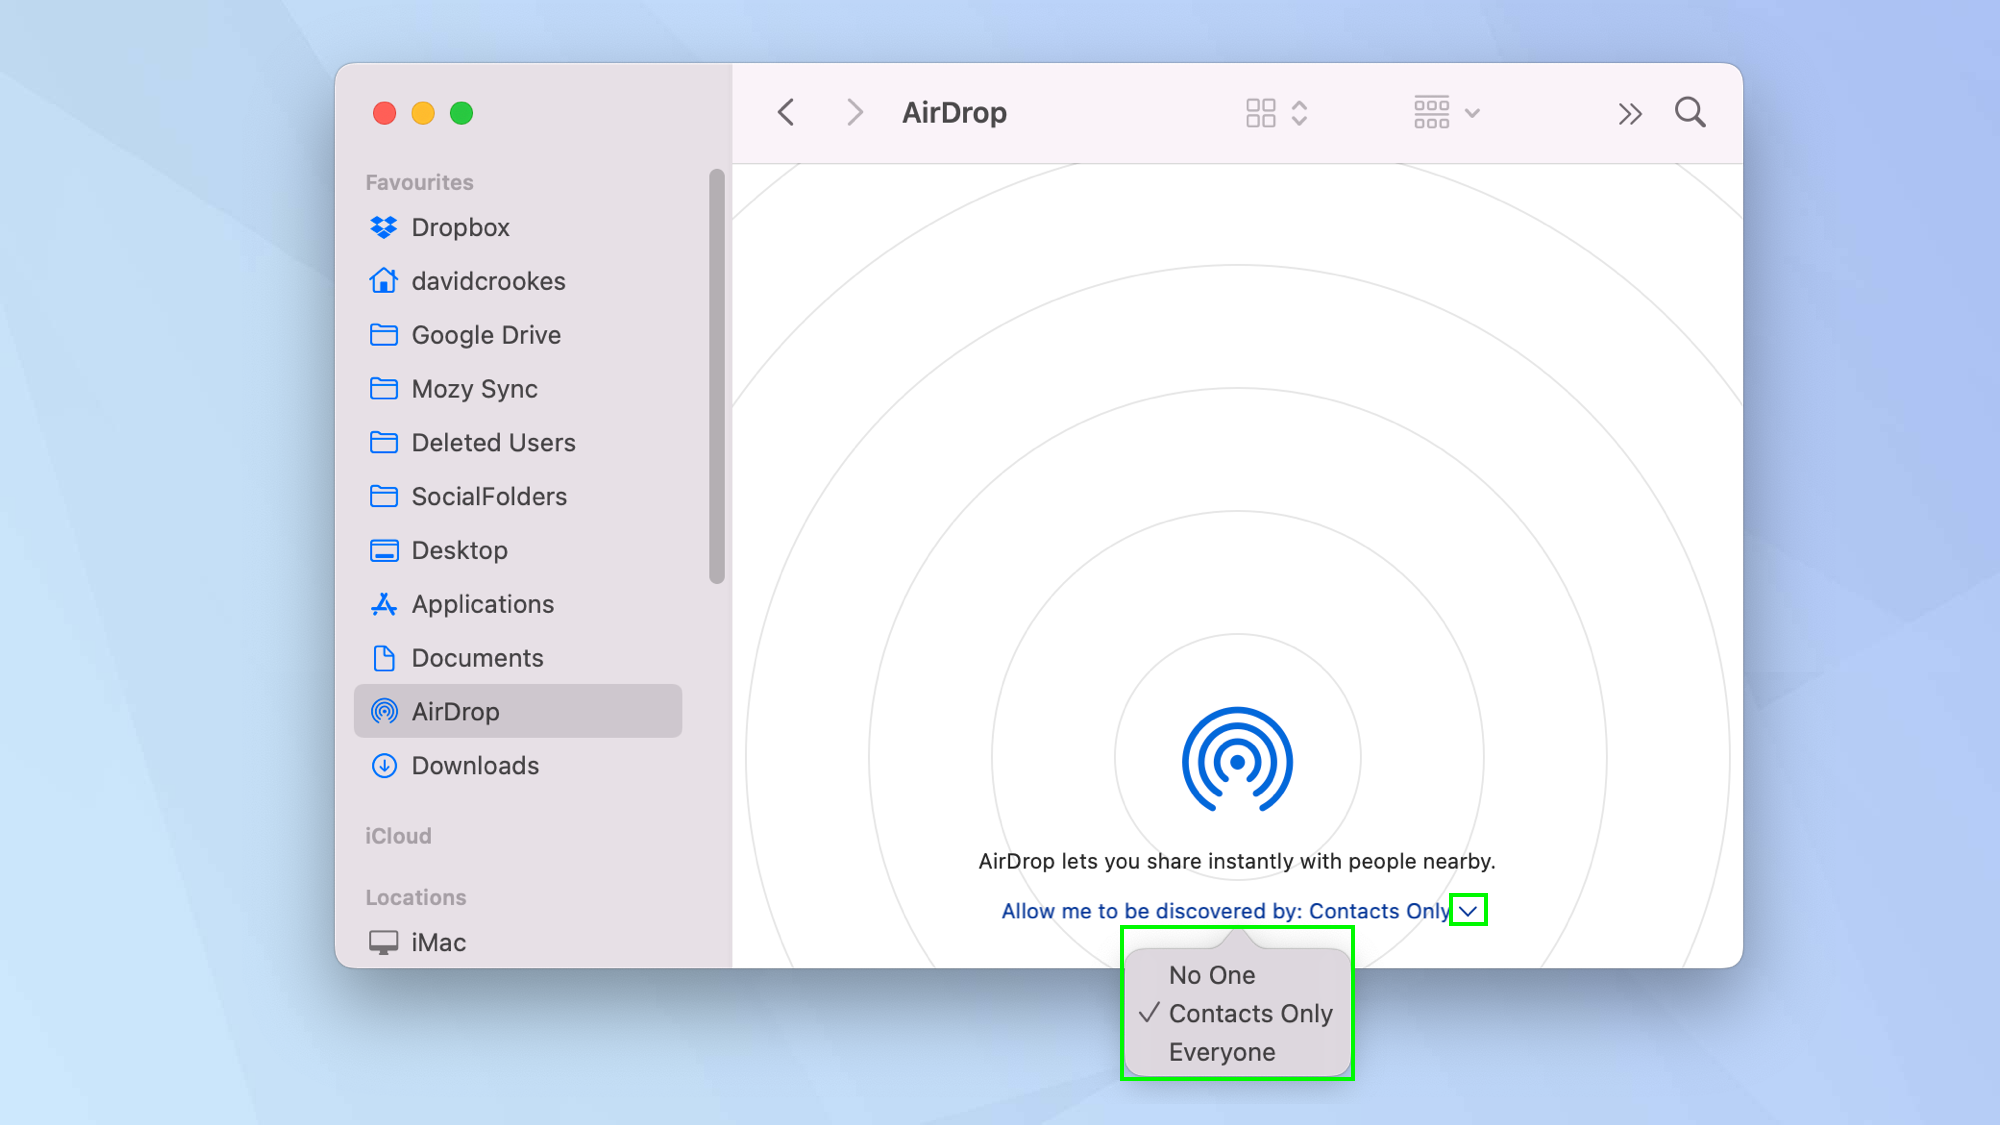 How to airdrop on Mac